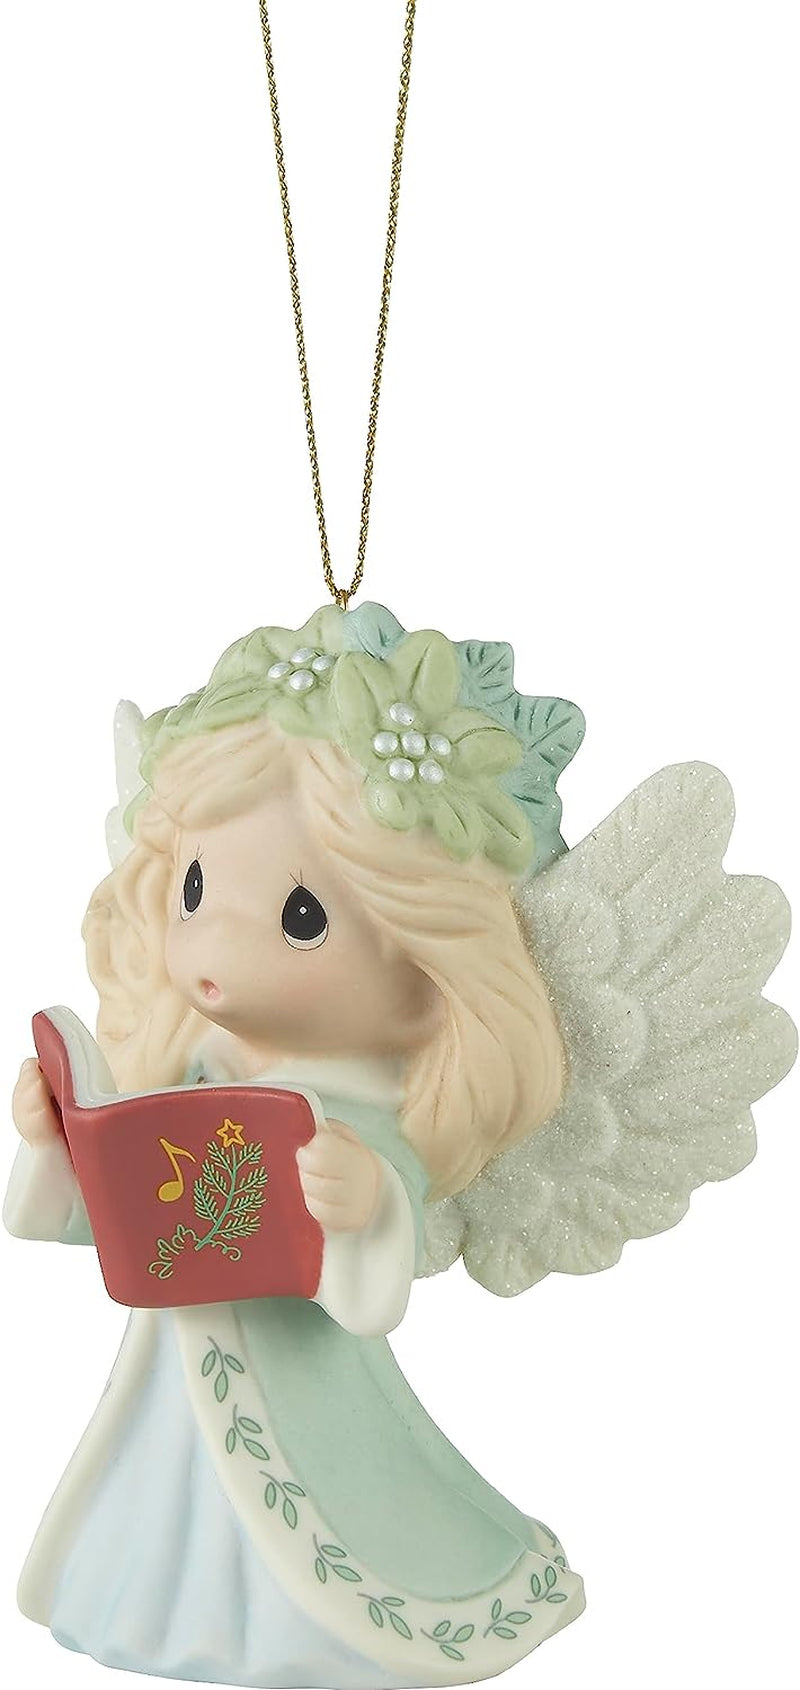 Precious Moments 231018 Wishing You Joyful Sounds of the Season Annual Angel Bisque Porcelain Ornament